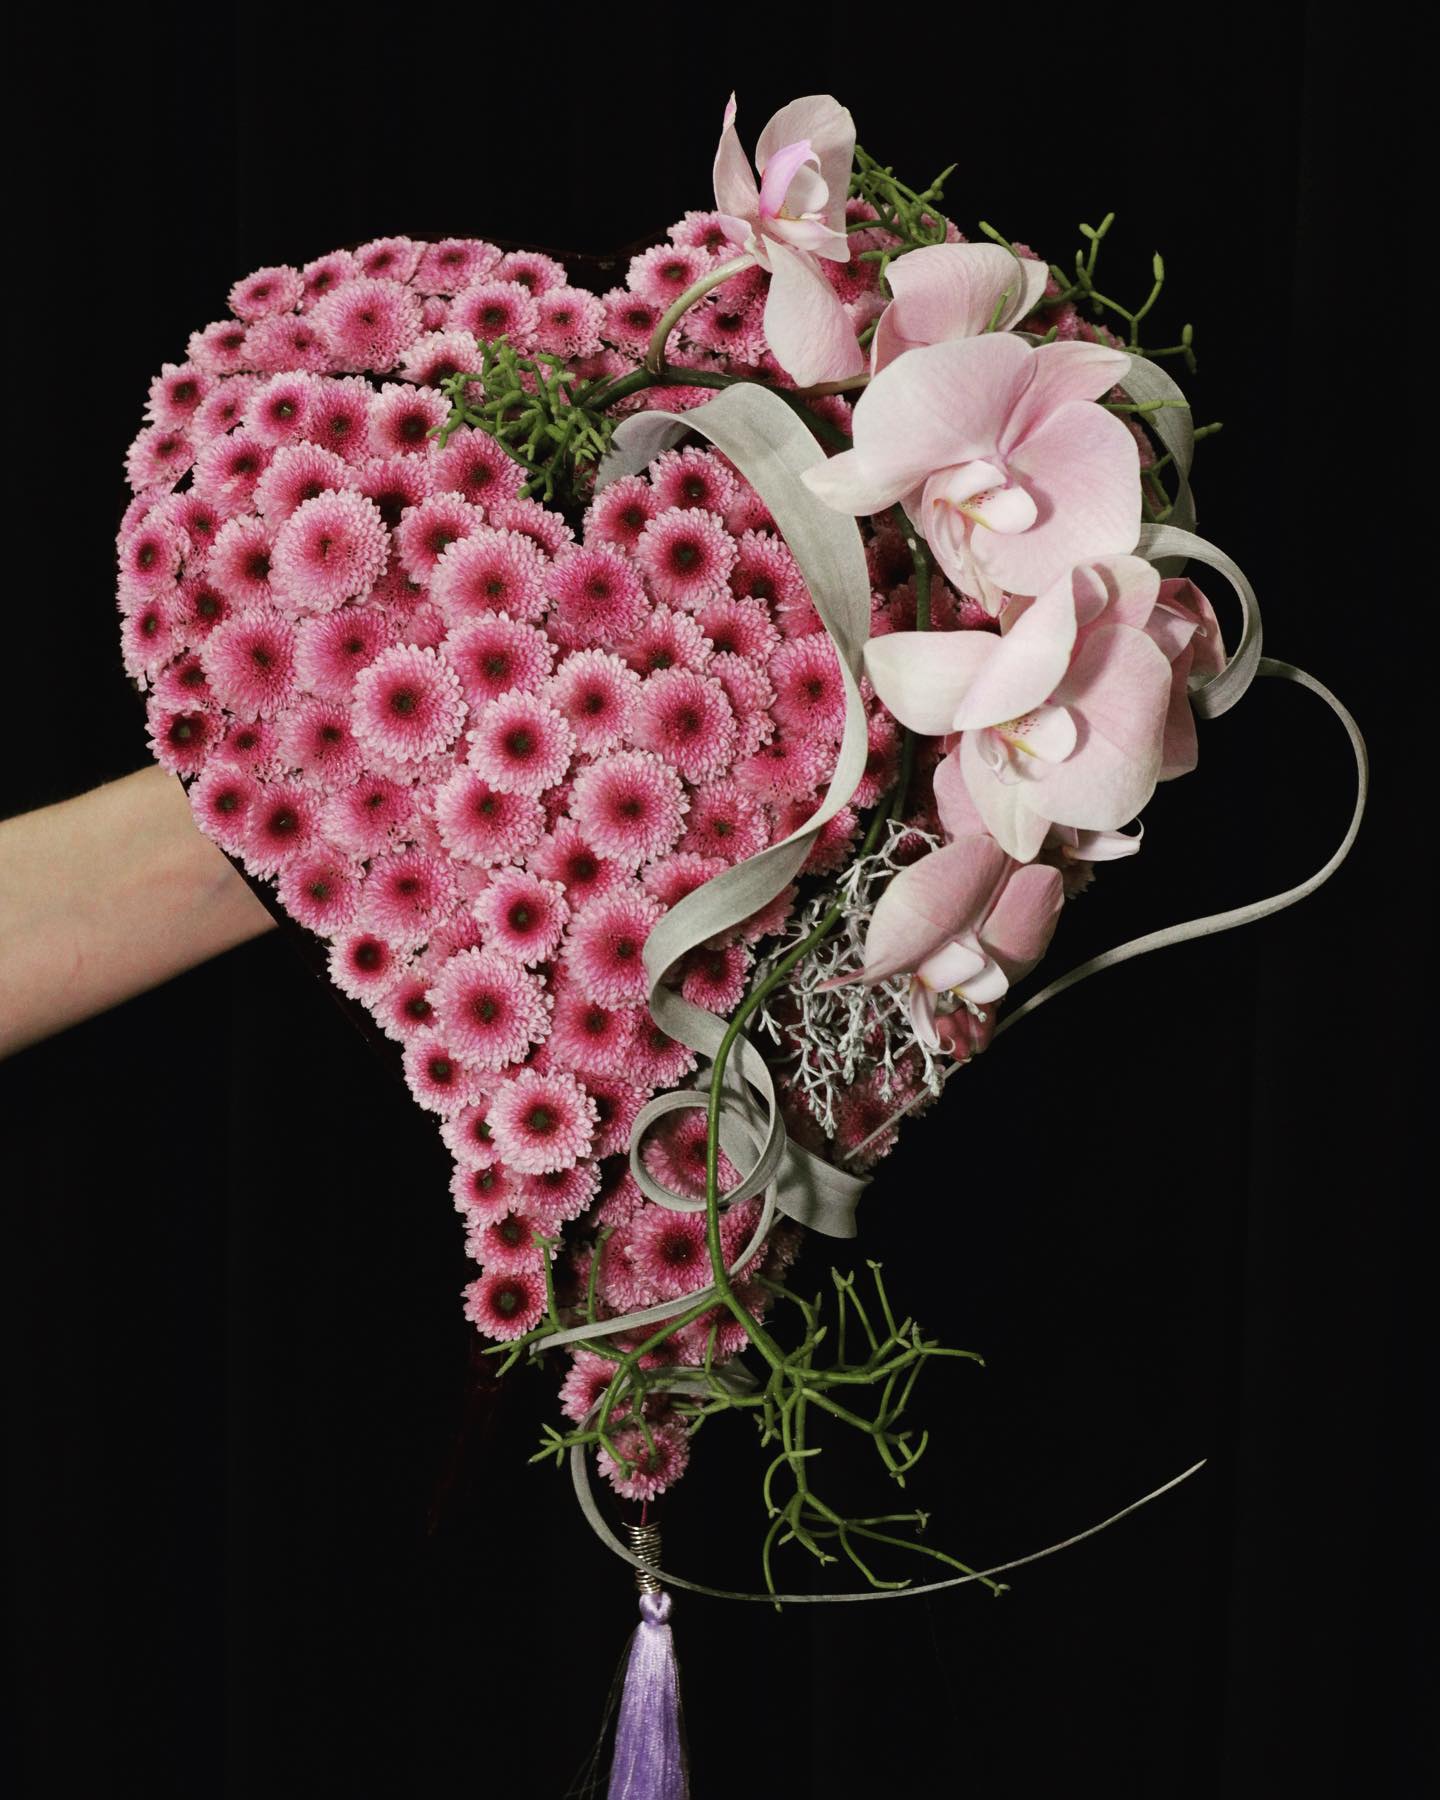 When Two Hearts Collide  - I Love to Design Wedding Flowers 4